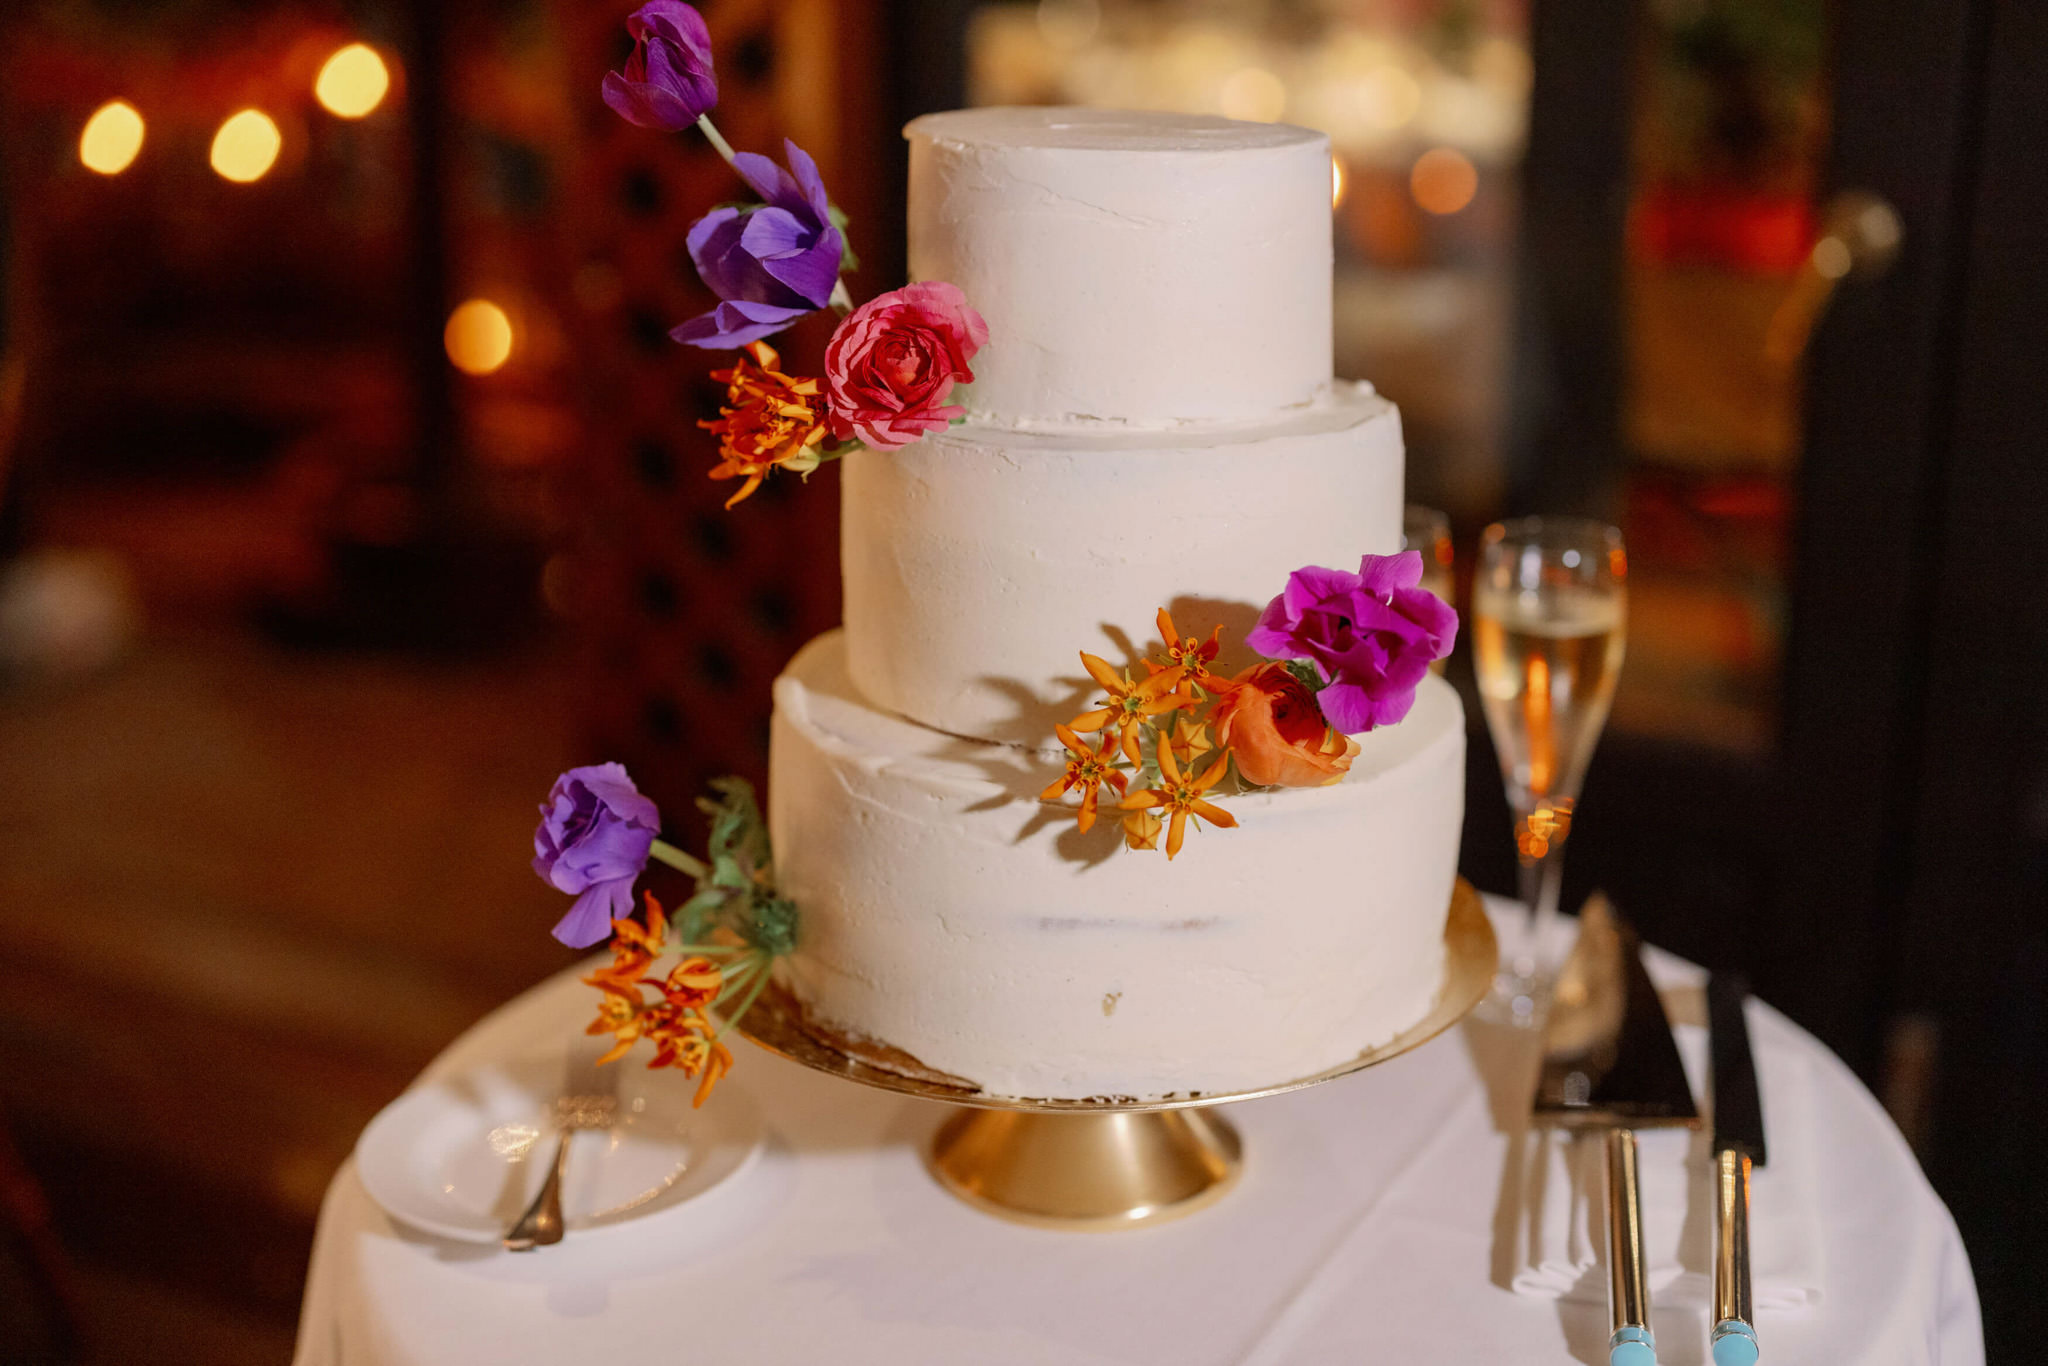 A three-layer white wedding cake with purple, orange and lavander-colored flowers. Editorial wedding image by Jenny Fu Studio